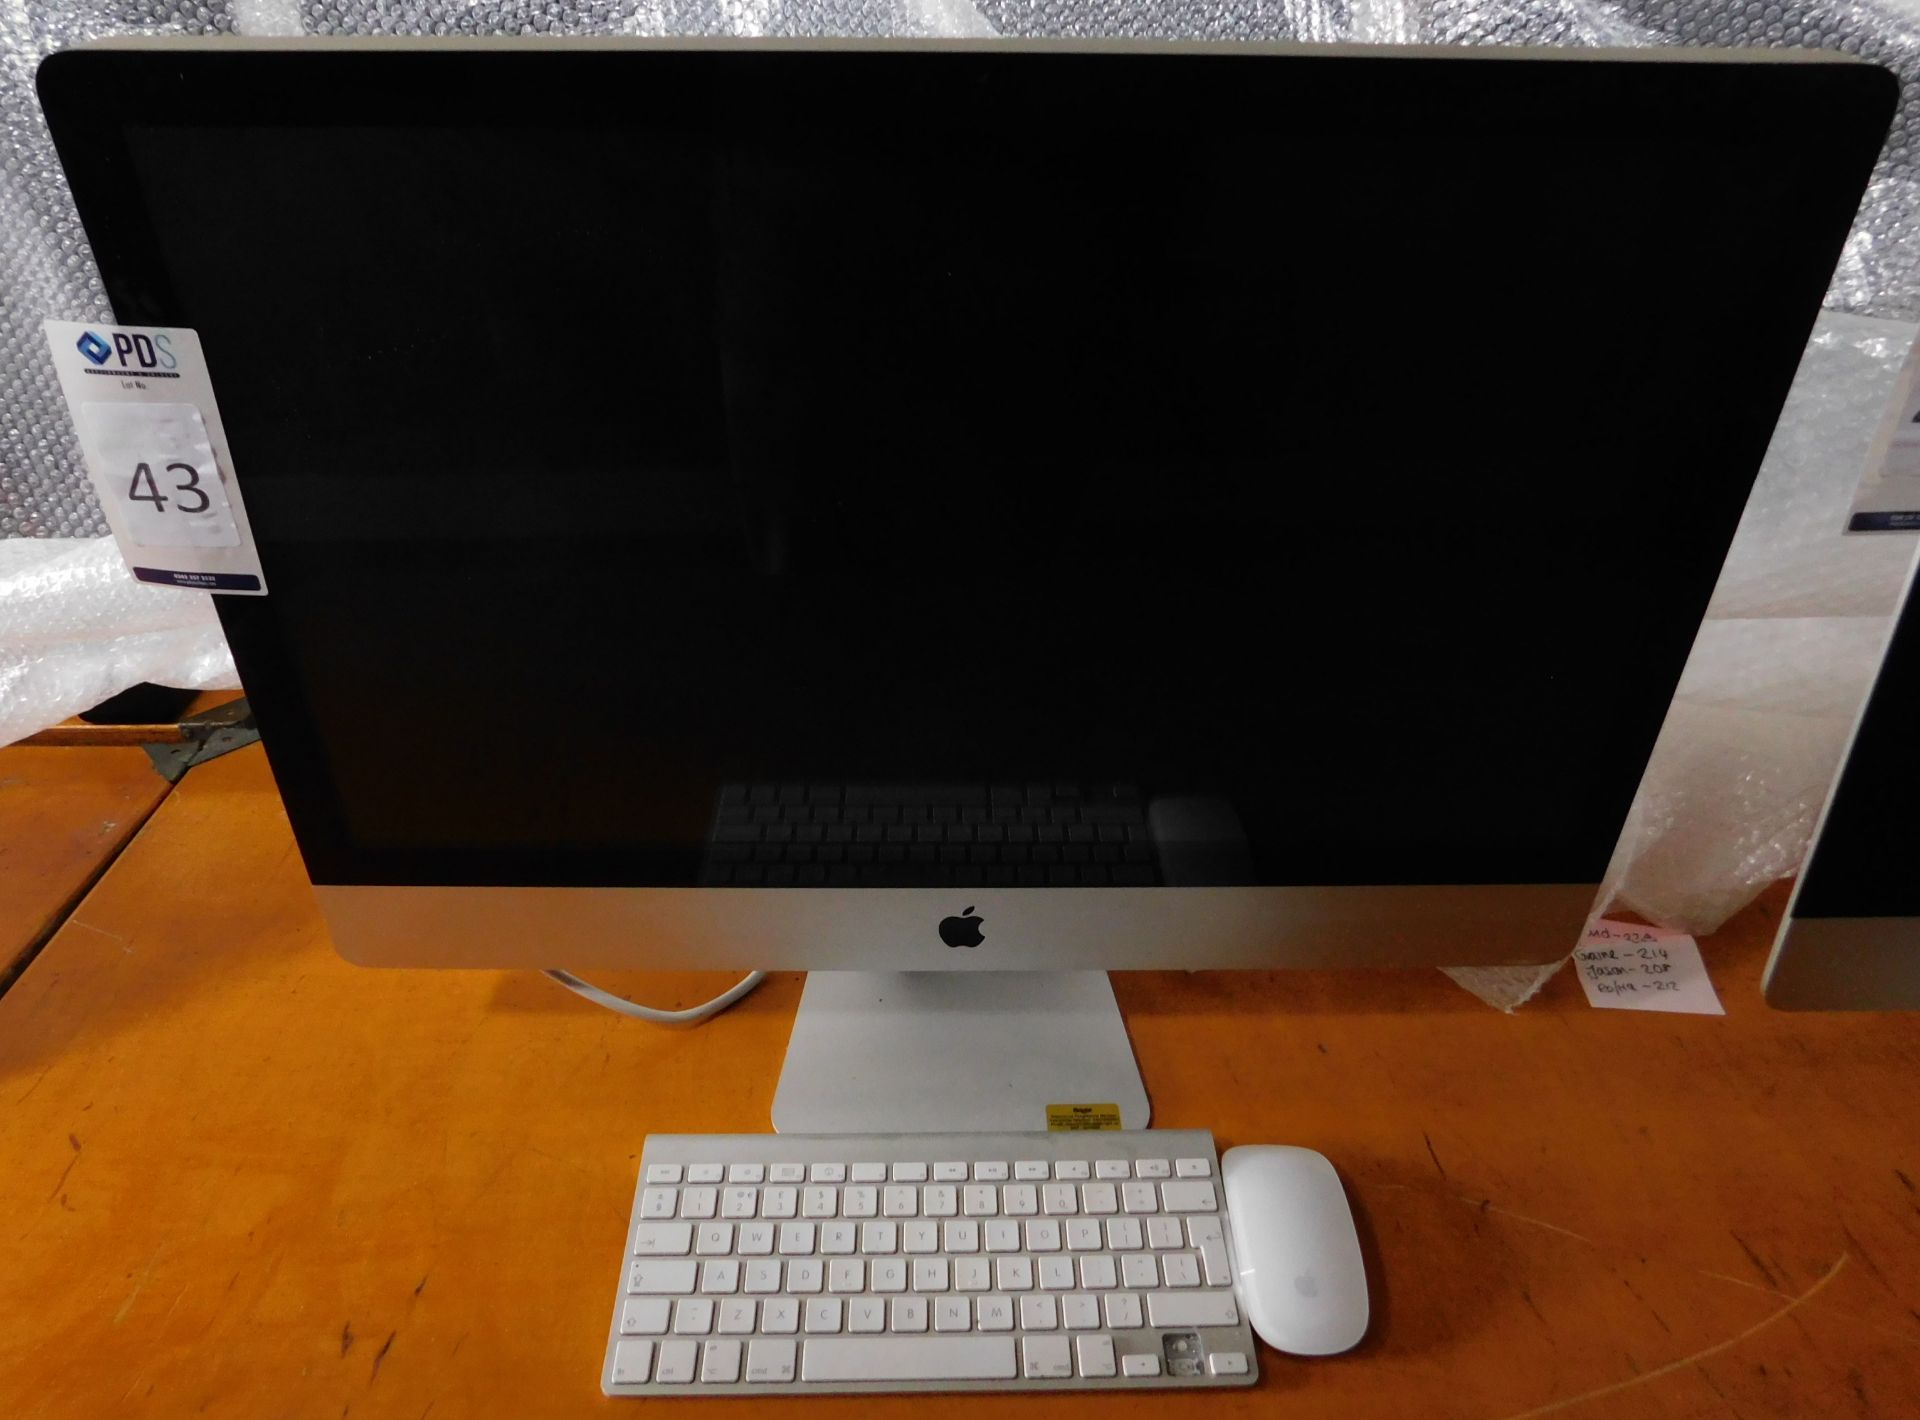 Apple iMac 27” 3.06 GHz Core 2 Duo, with Mouse & Keyboard, Serial Number: W894532T5PM (Located